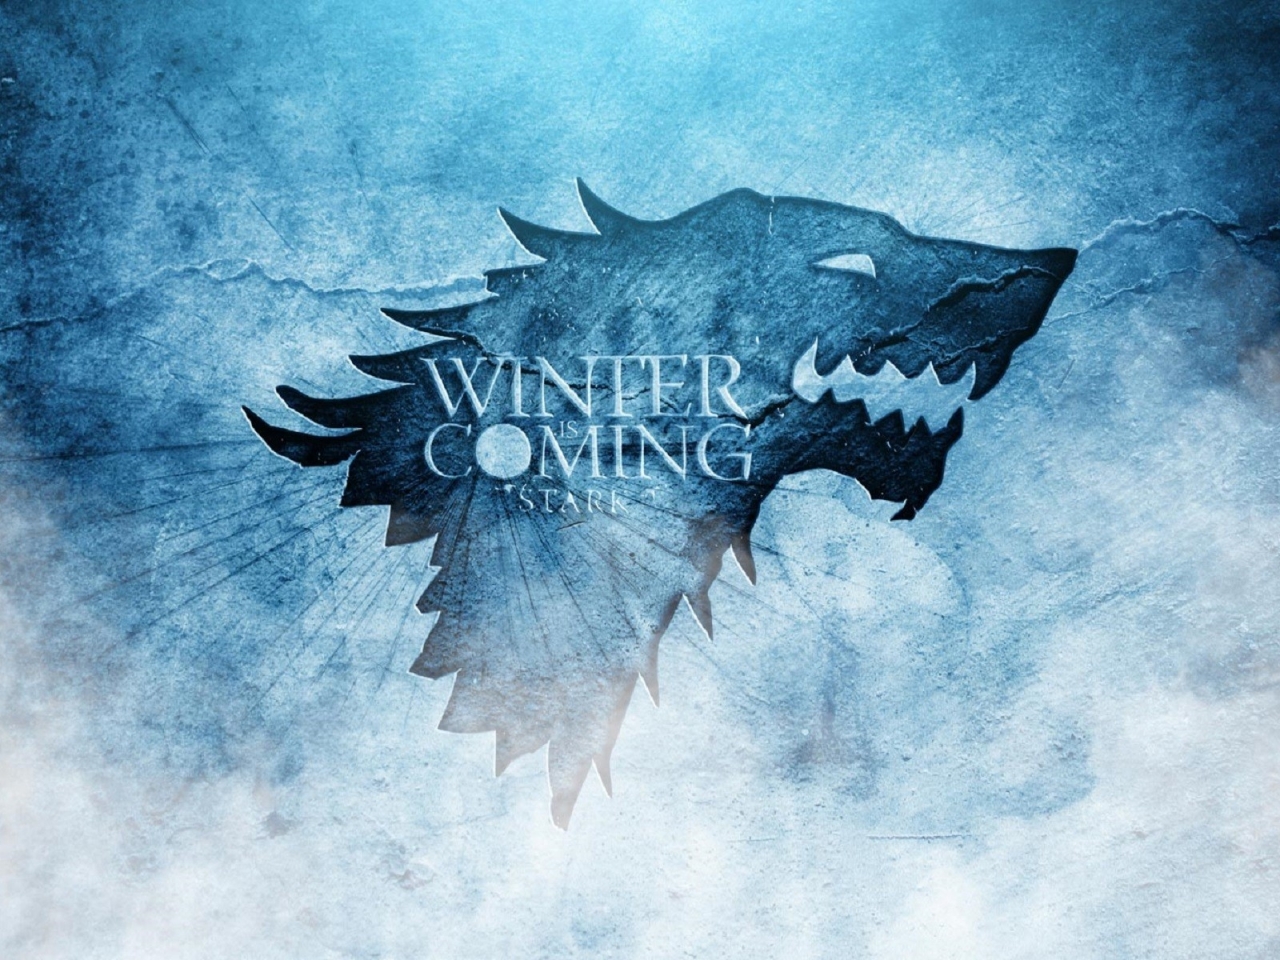 Game of Thrones the Song of Ice and Fire for 1280 x 960 resolution